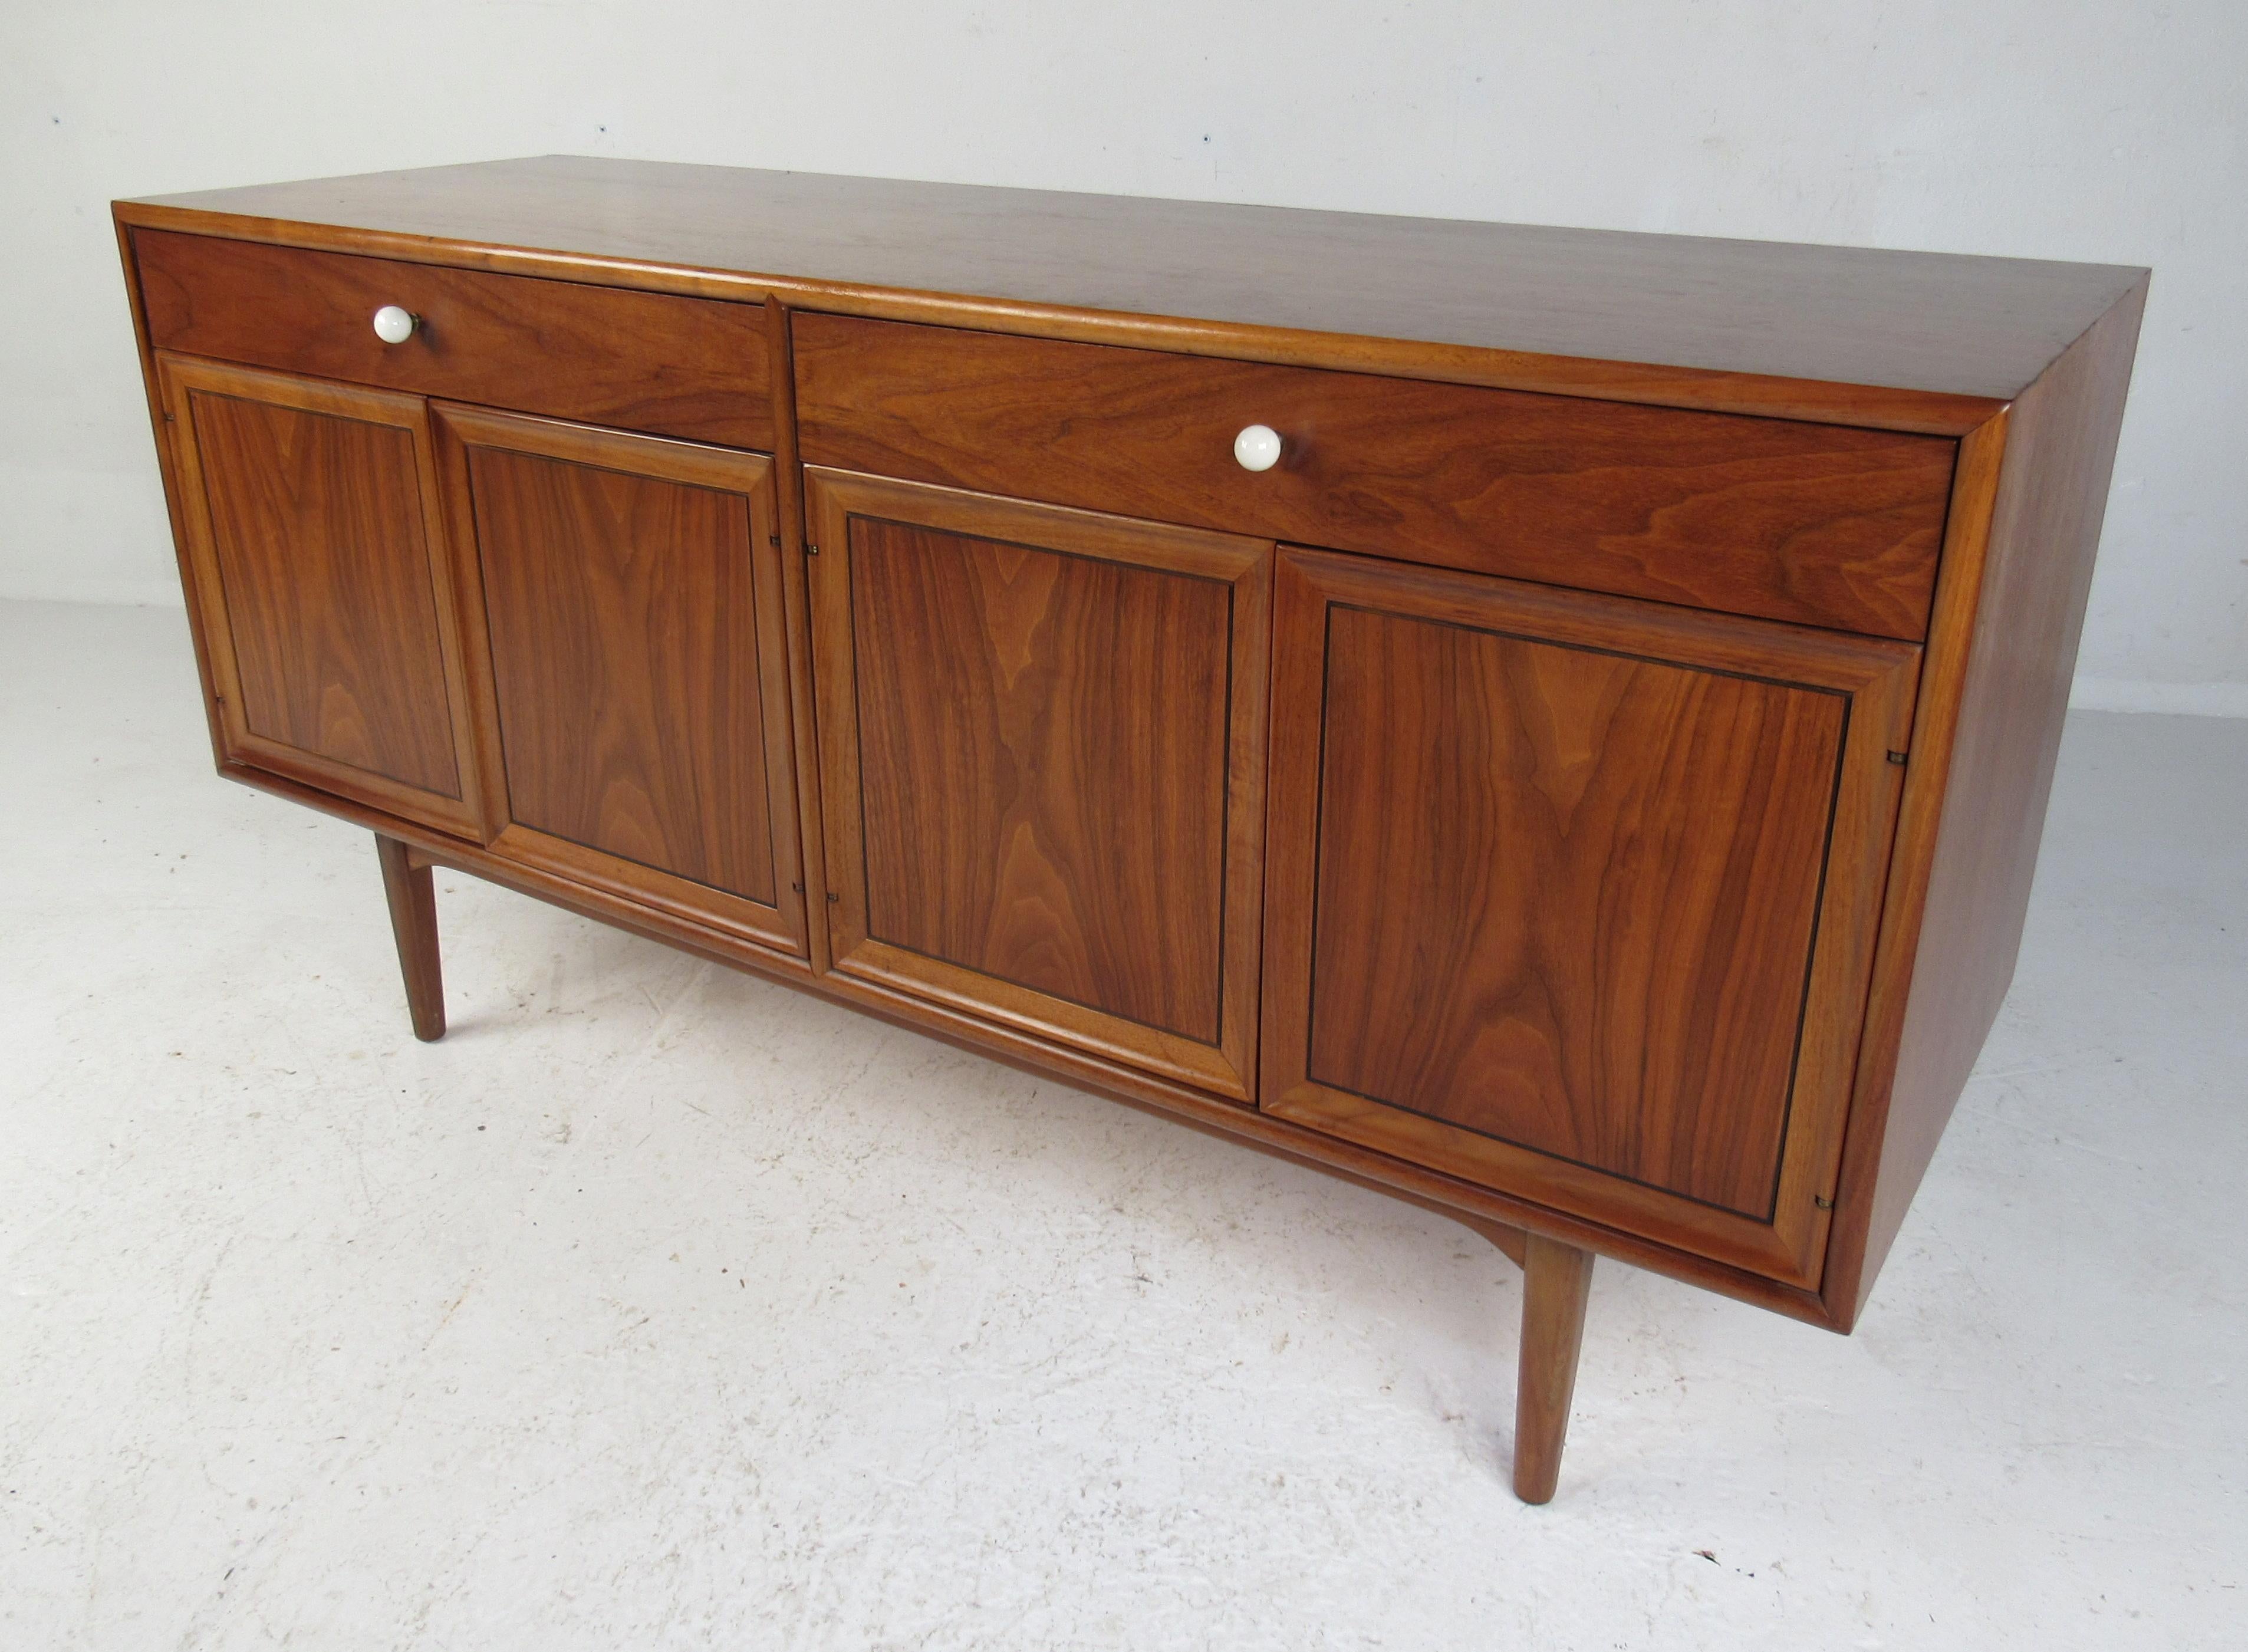 Beautiful wood grain with clean lines, this walnut sideboard was designed by Kip Stewart and Stewart MacDougall for the 